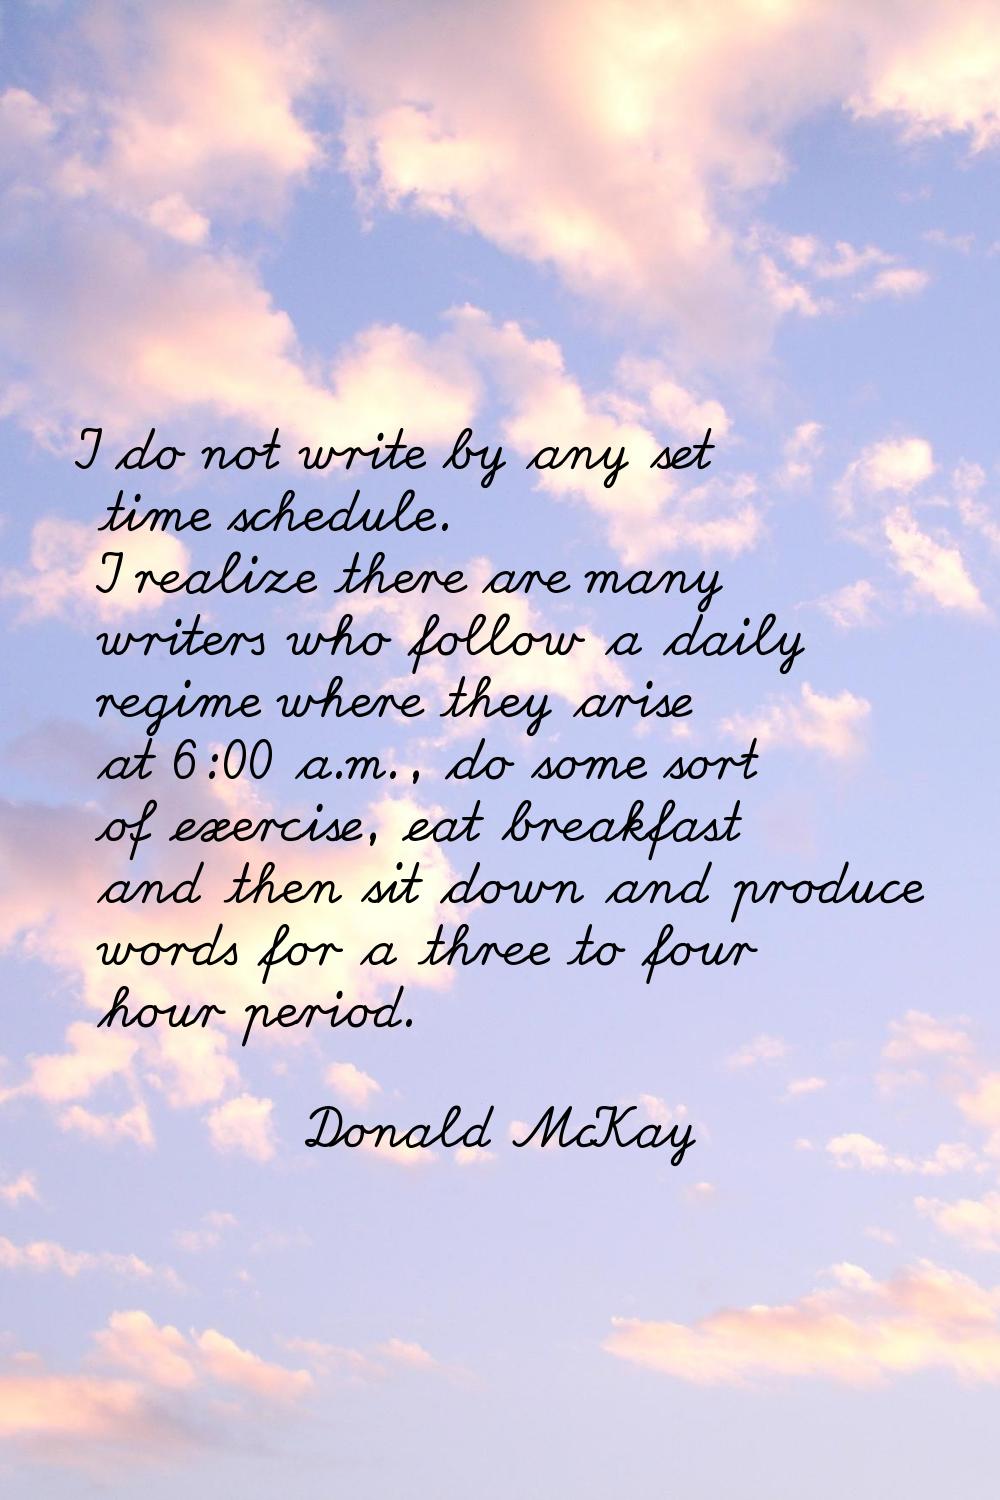 I do not write by any set time schedule. I realize there are many writers who follow a daily regime